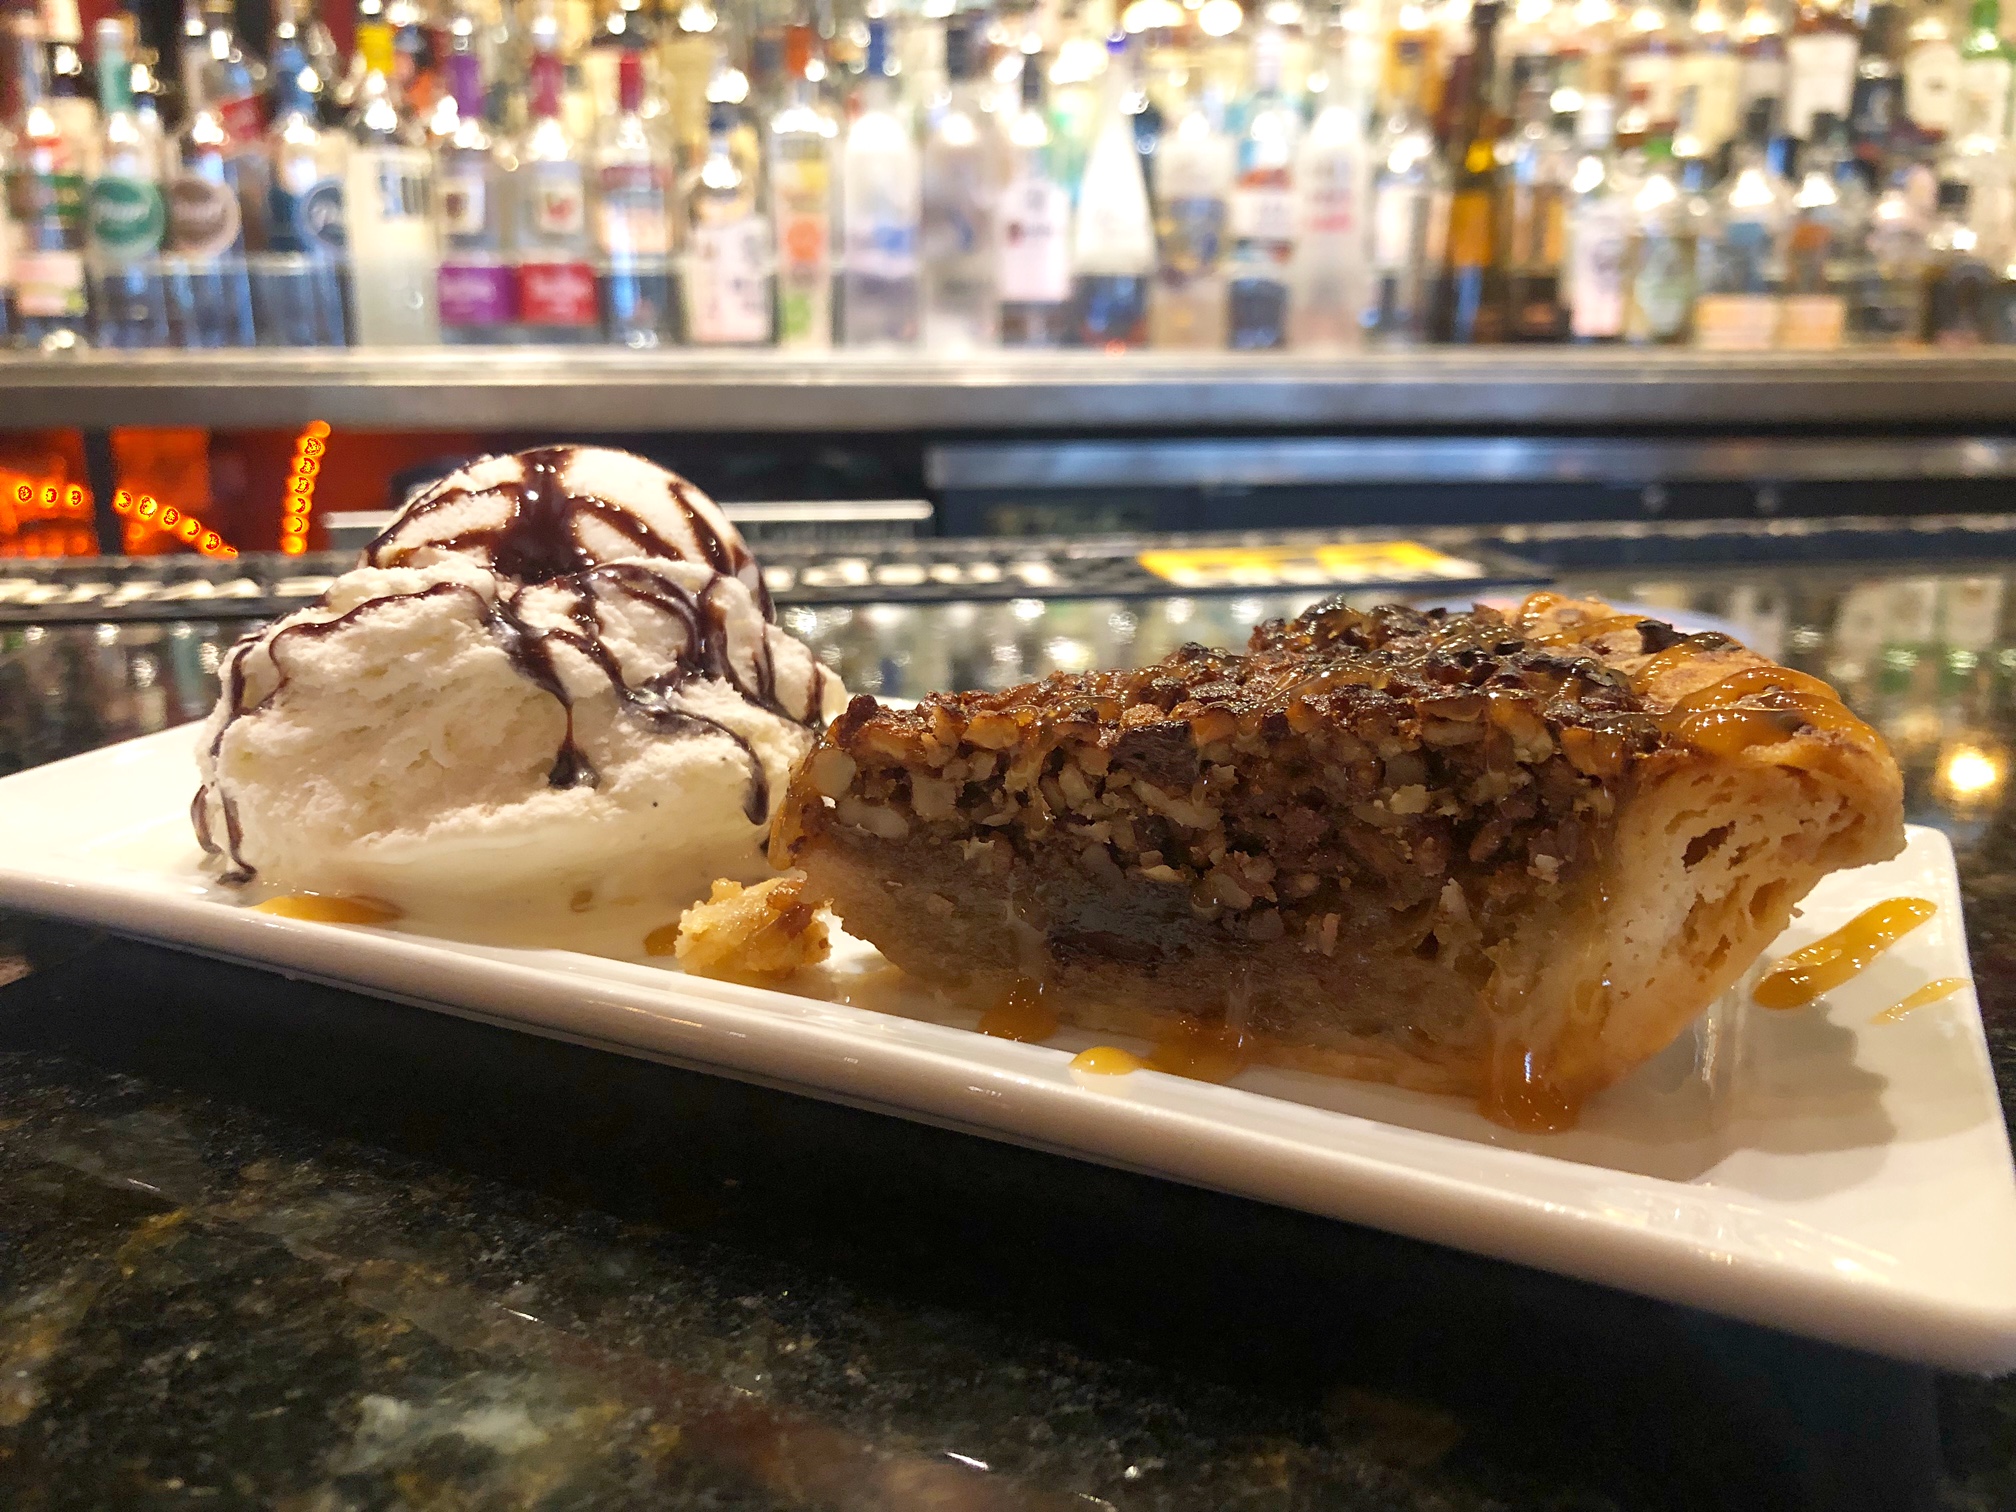 On a shiny gray bar, there is a long rectangular plate with a slice of pecan pie and a scoop of vanilla ice cream with chocolate drizzle. Photo by Alyssa Buckley.